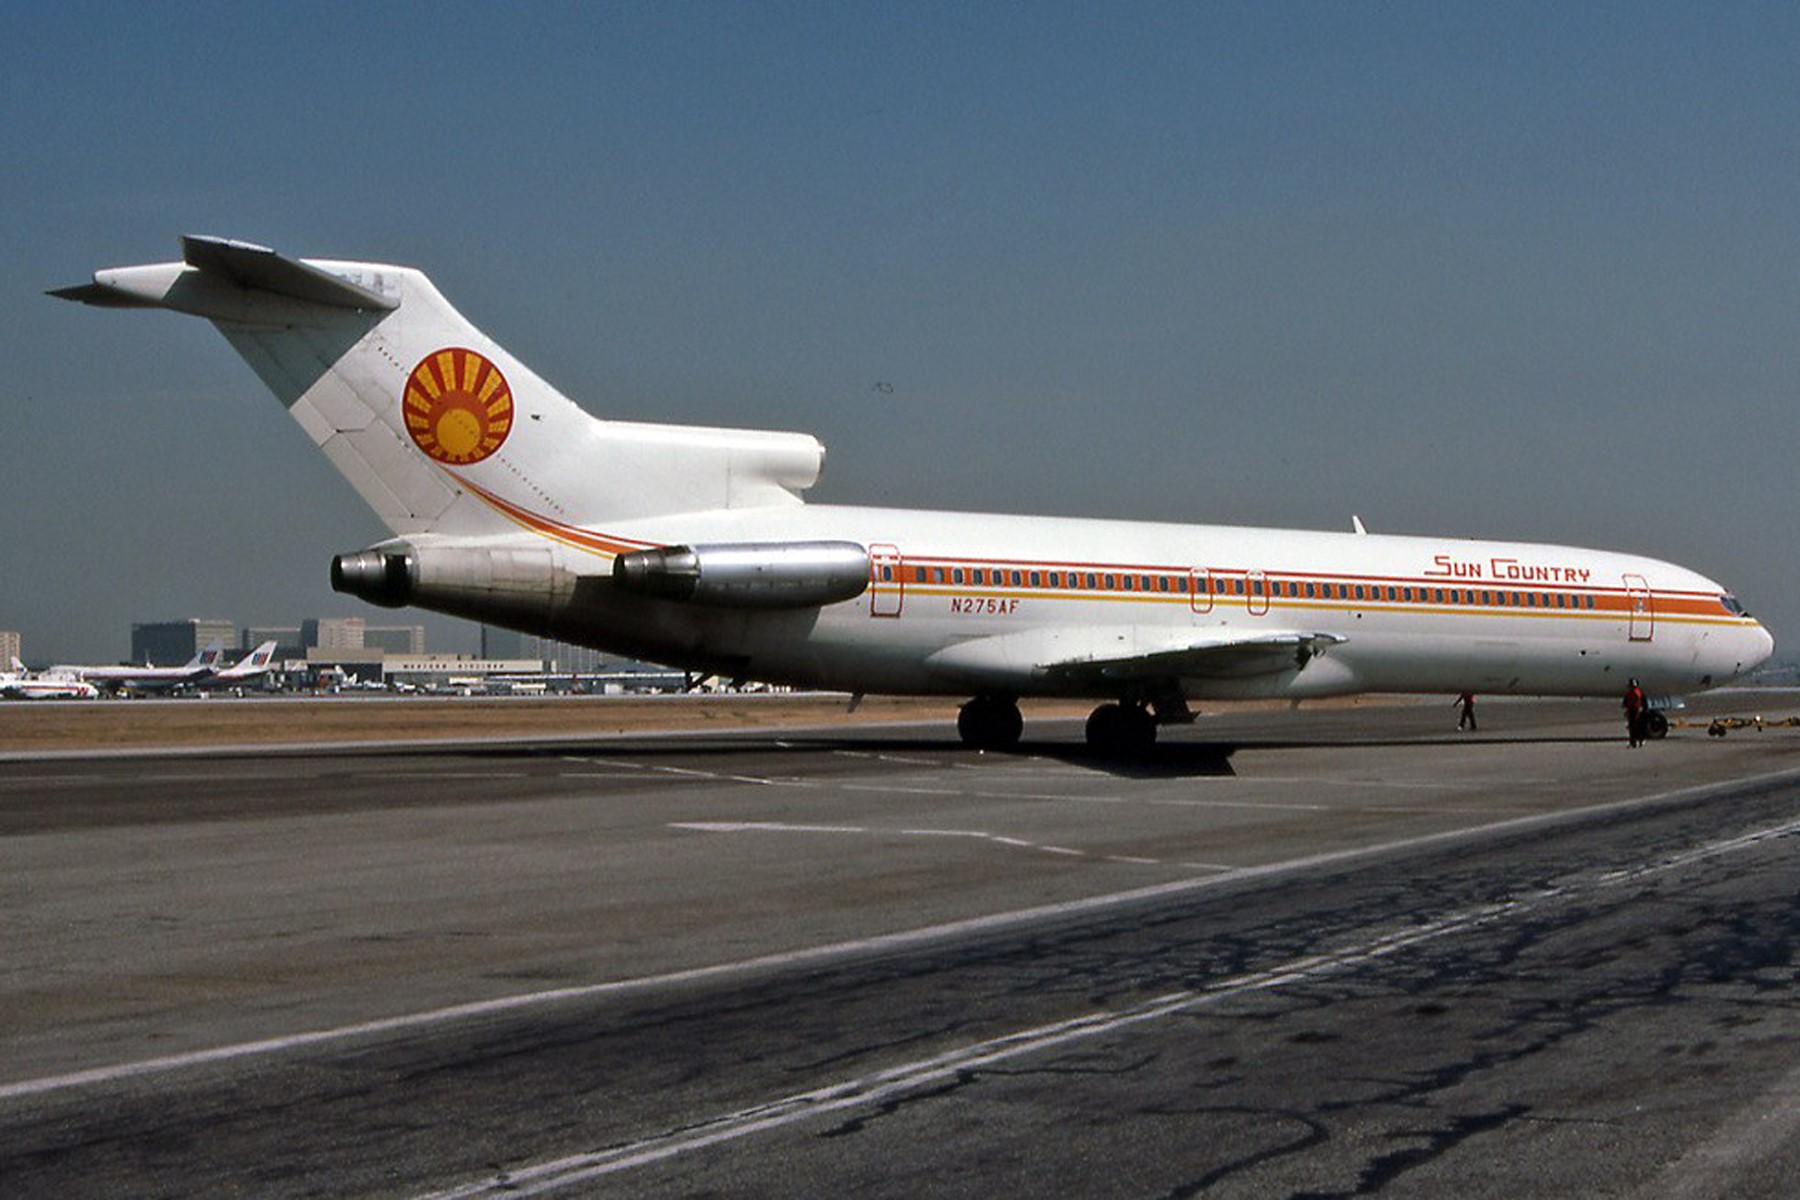 Sun Country Airlines B727-227, N275AF
Seen at LAX International Airport on 10 Dec 1985
Wearing the original Sun Country colors and logo.
Photo Courtesy of Derek Heley